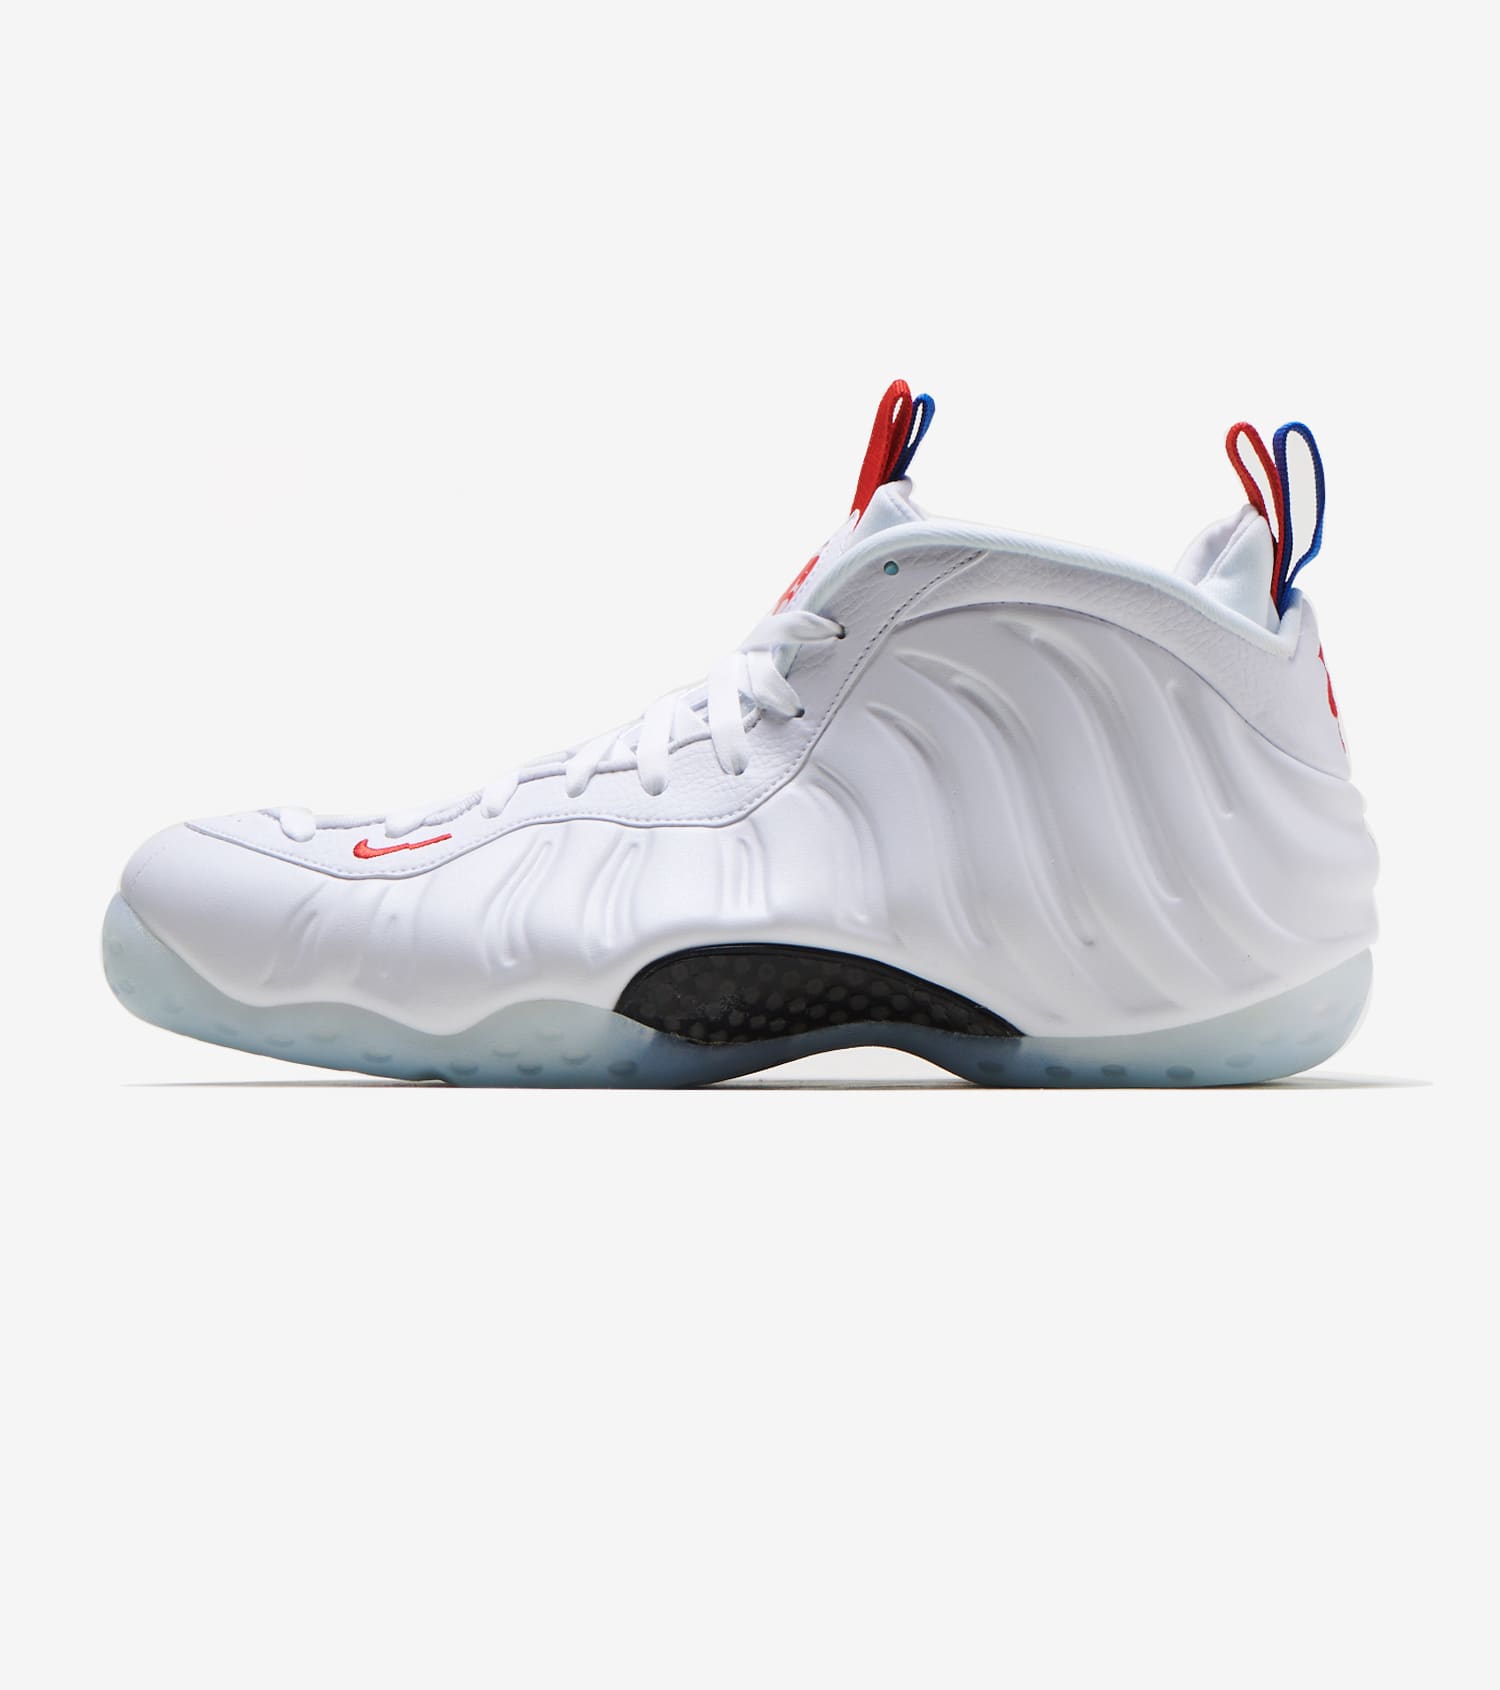 Nike Shoes New Air Foamposite One Marble Womens 85